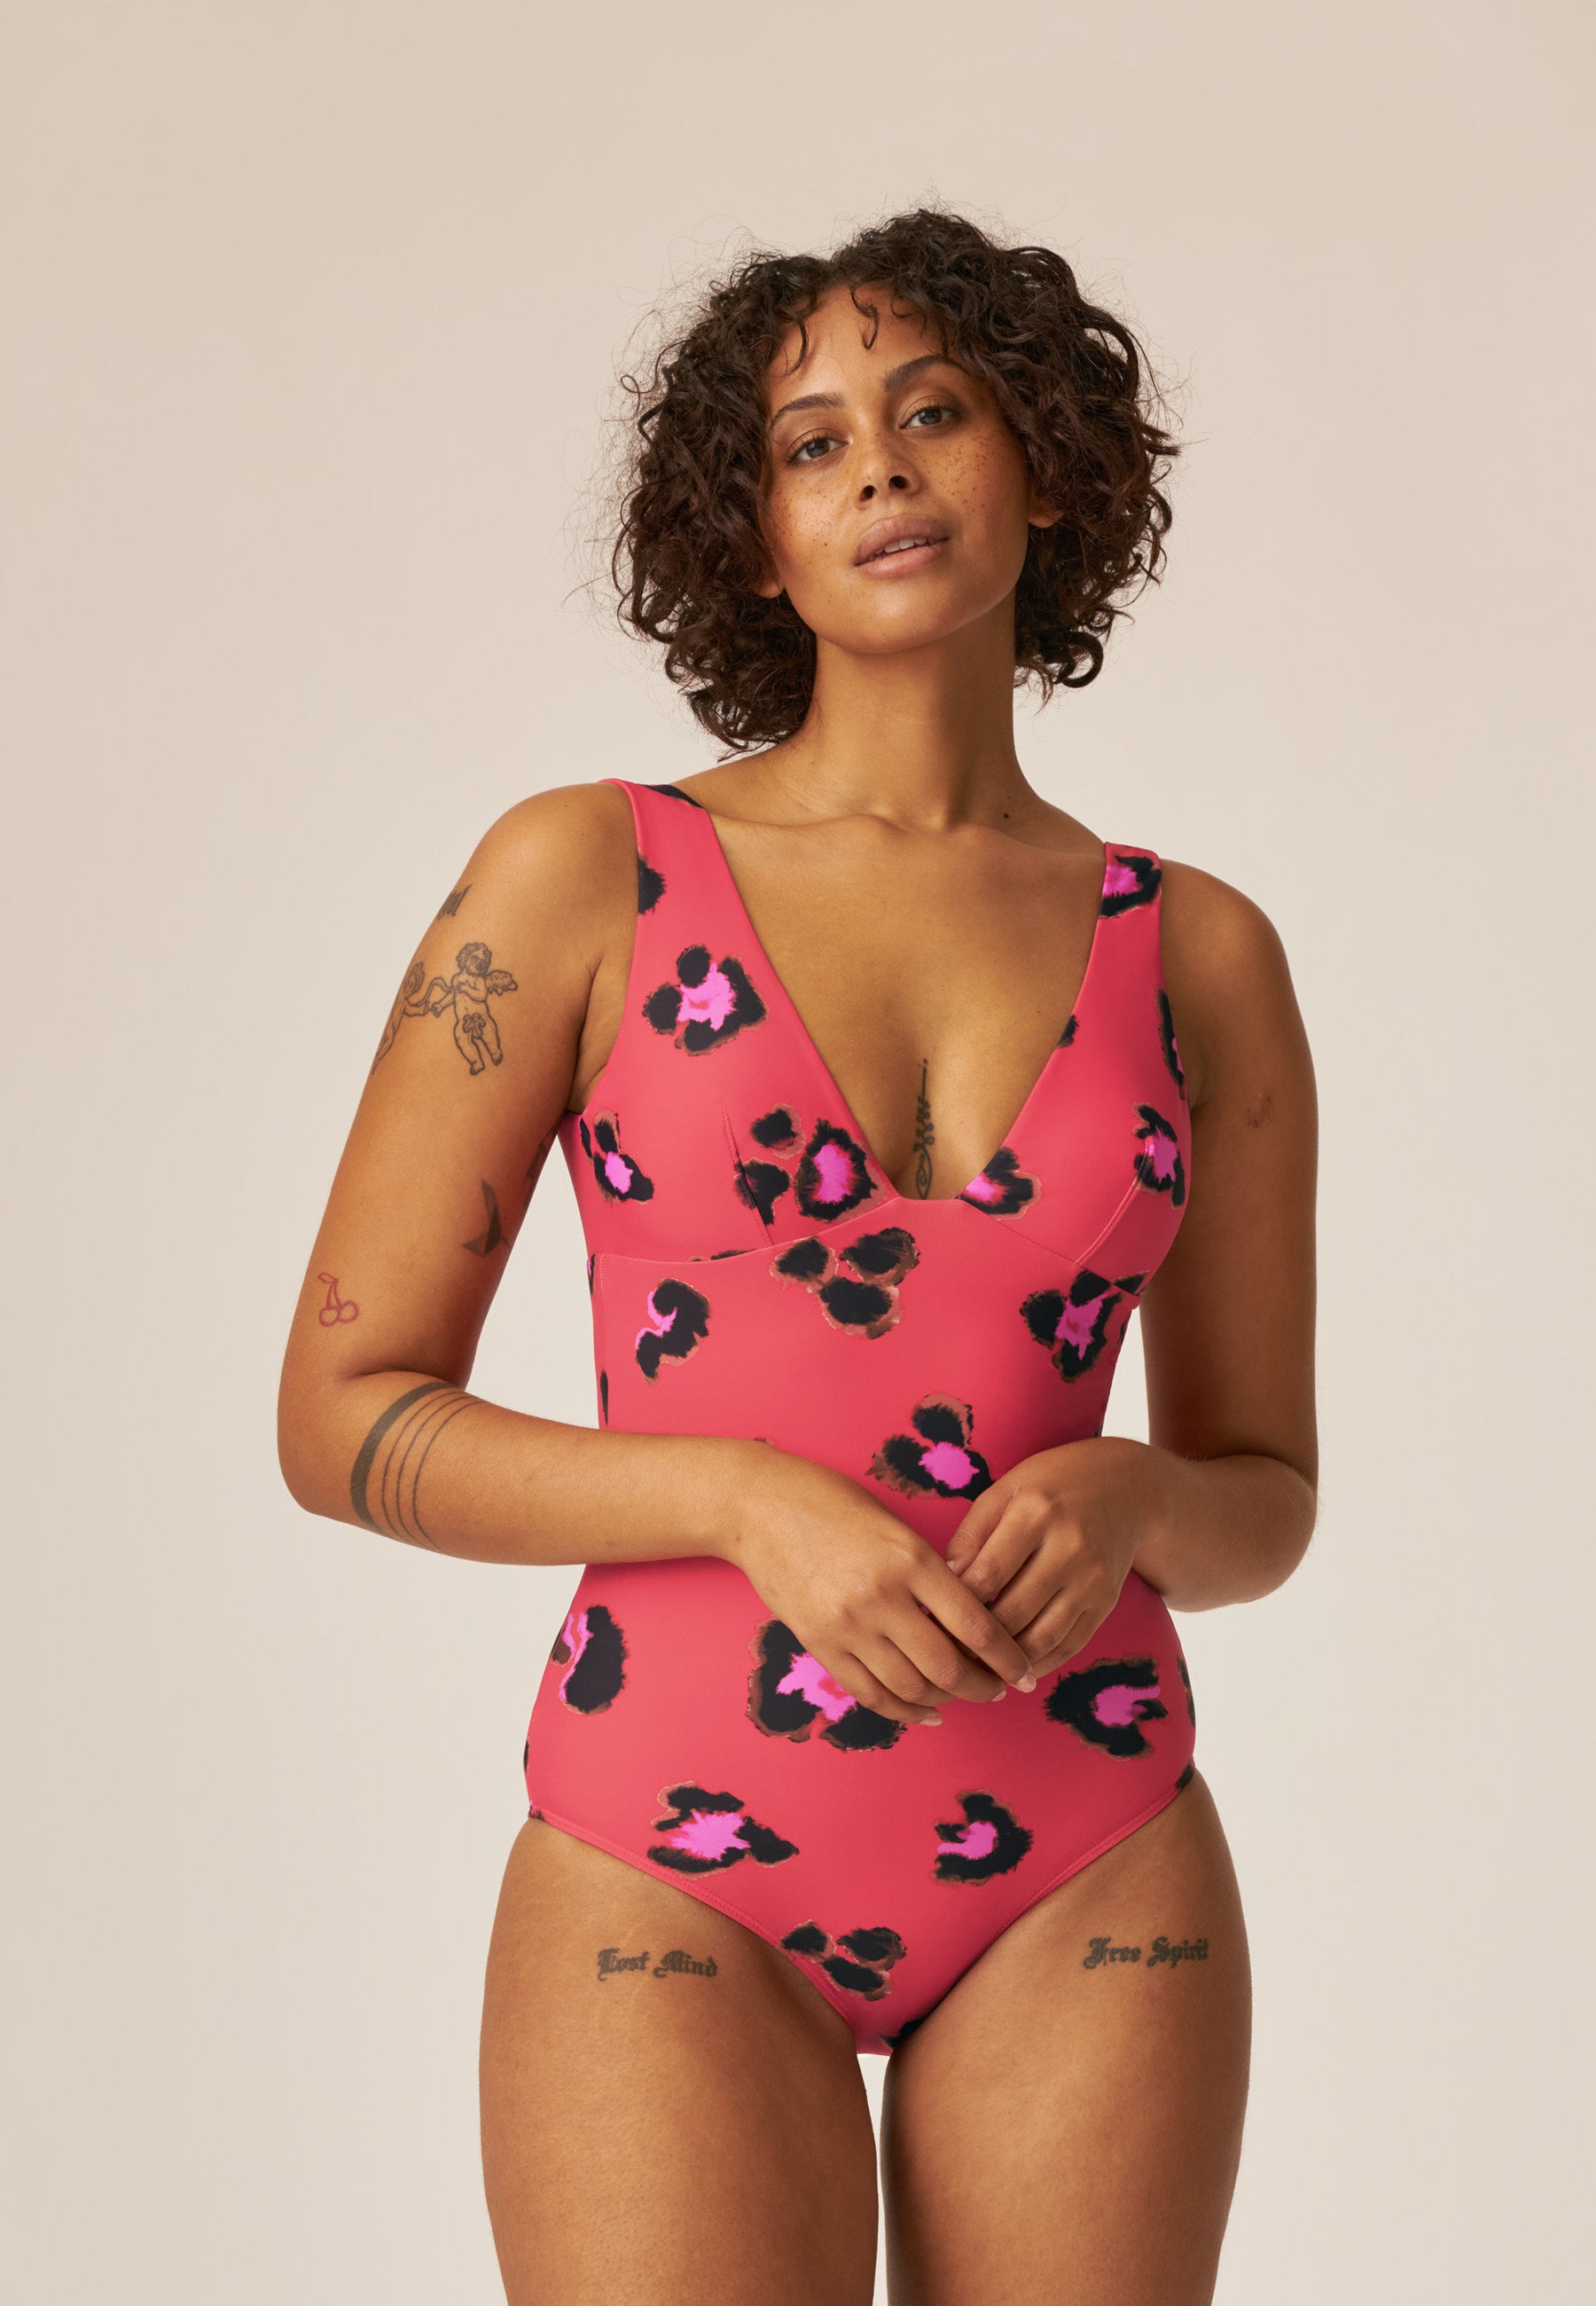 Leopard Print Swimsuit - Small Escapes / Safari Park - Red Brown Pink